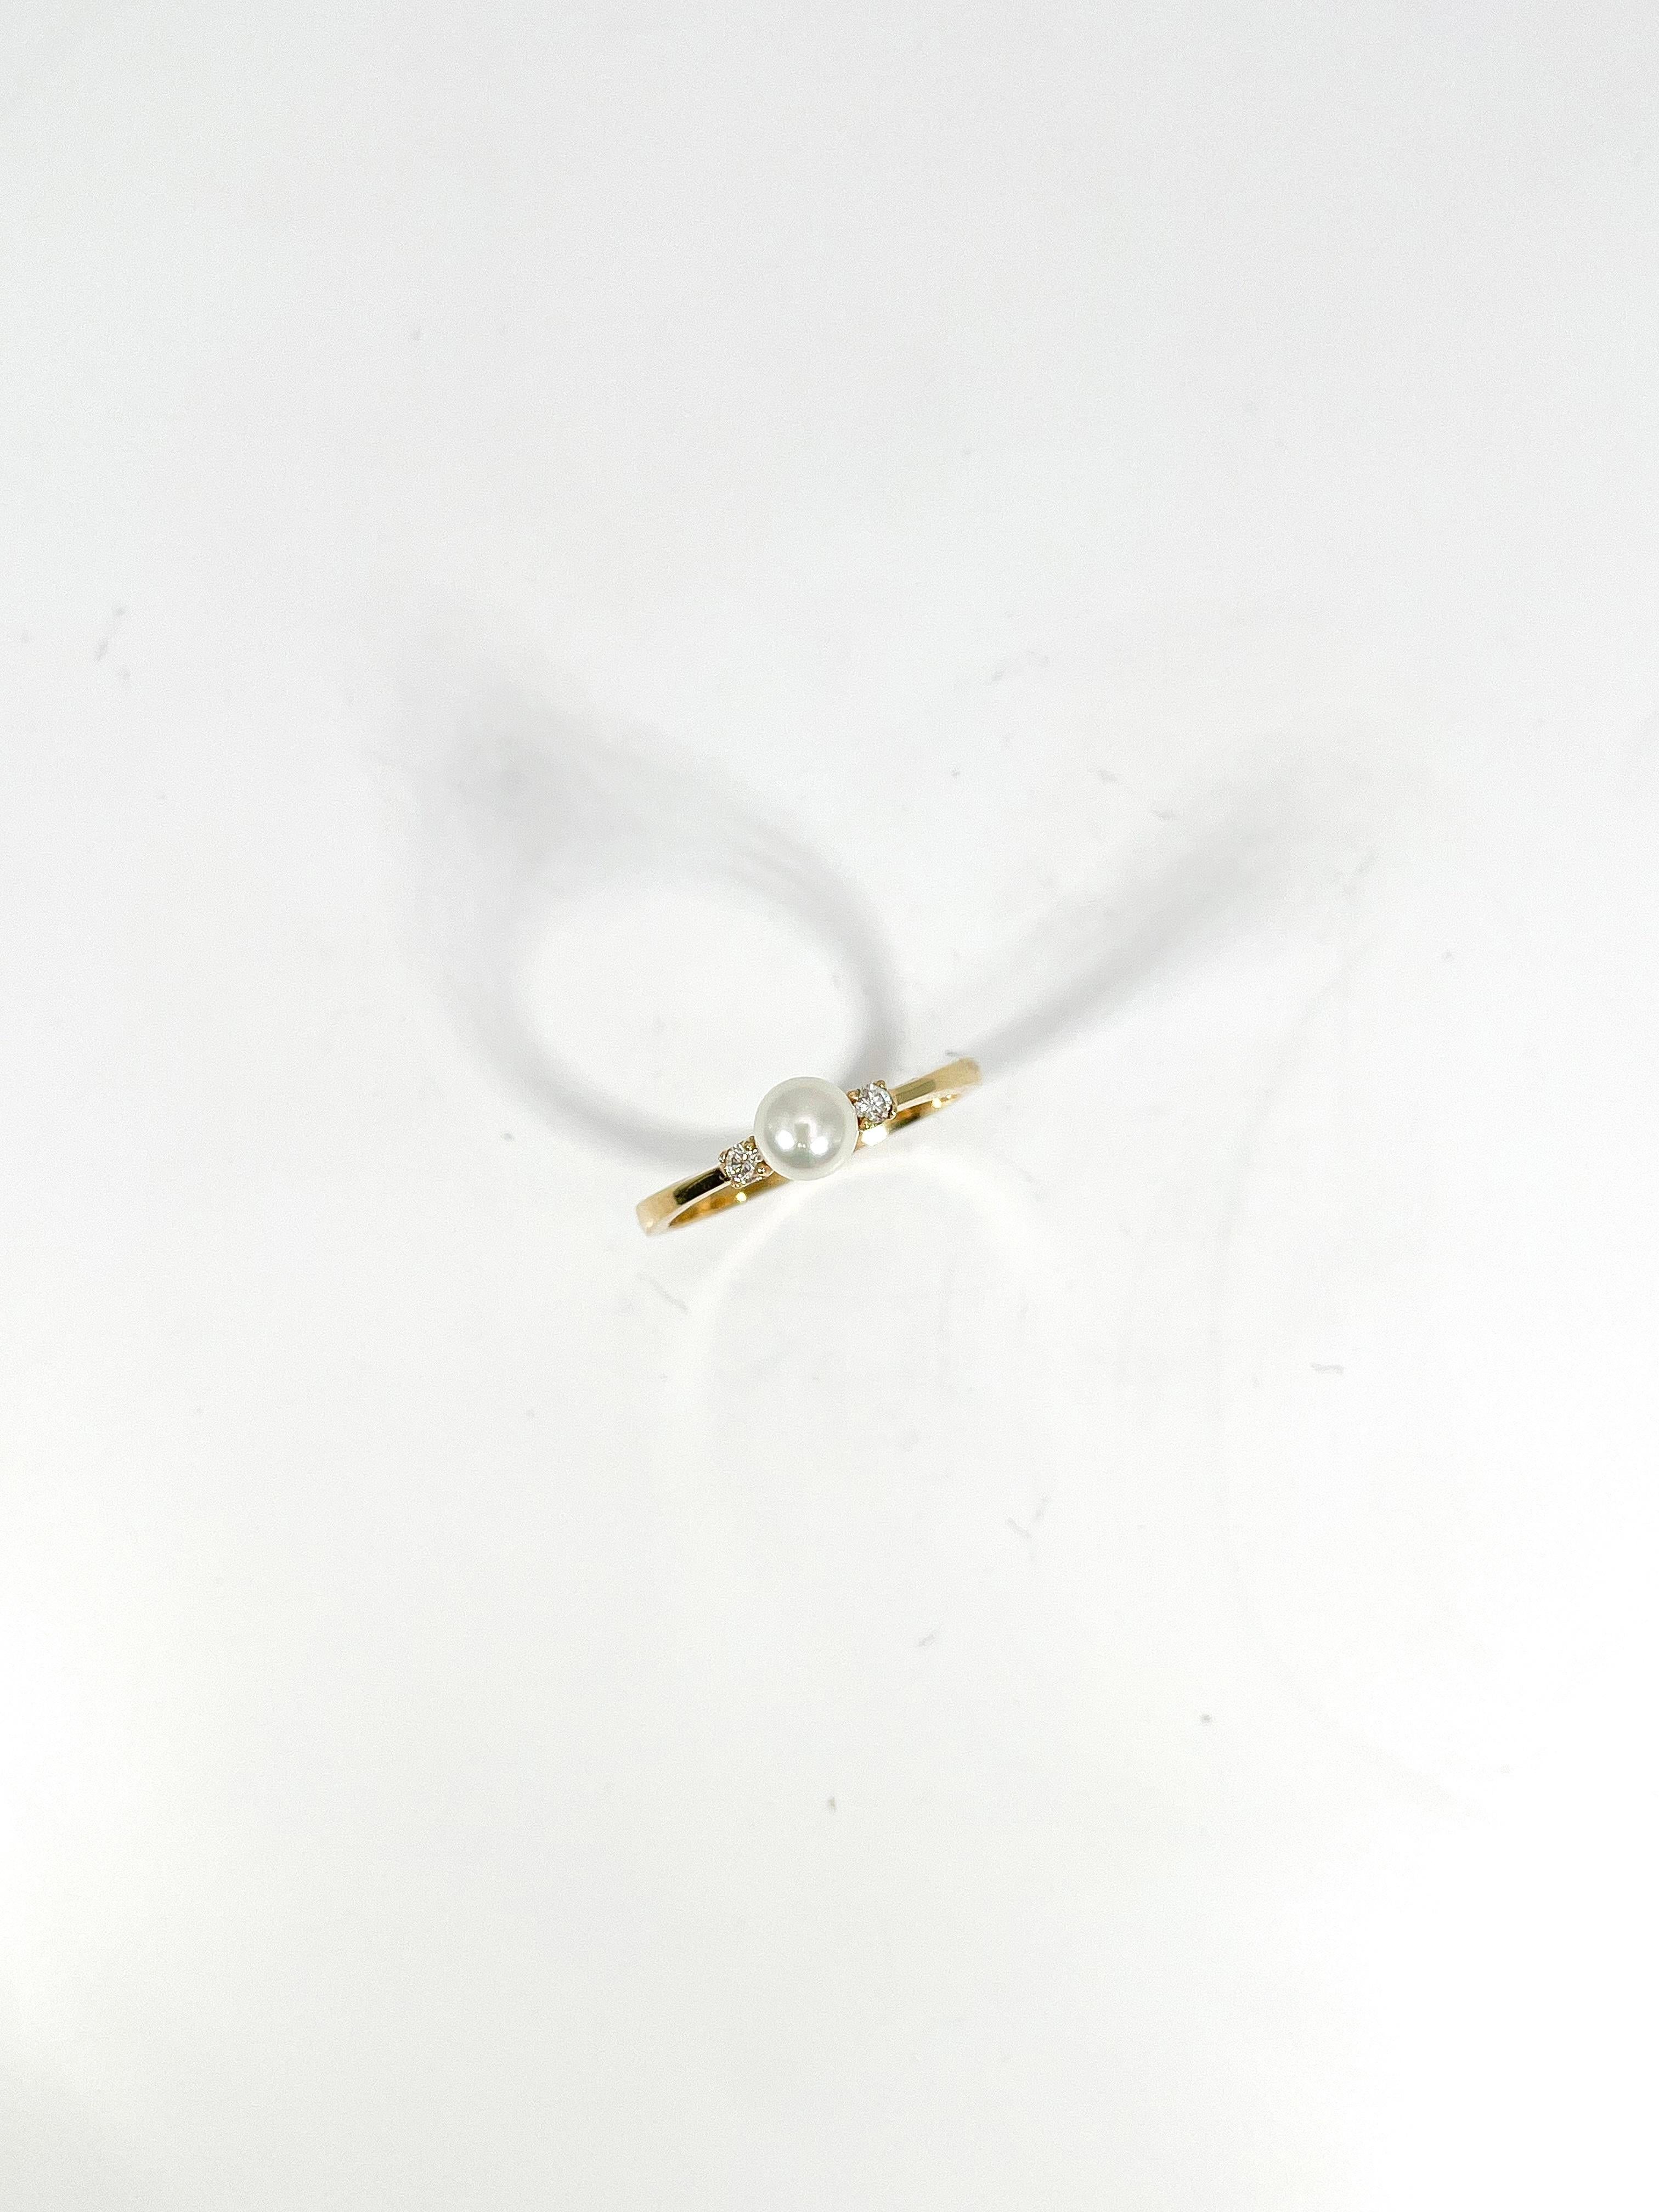 14k yellow gold white pearl and diamond ring. The width of this ring is 5 mm, the ring size is 6 1/4, both diamonds on either side of the pearl are both round, and it has a total weight of 1.9 grams